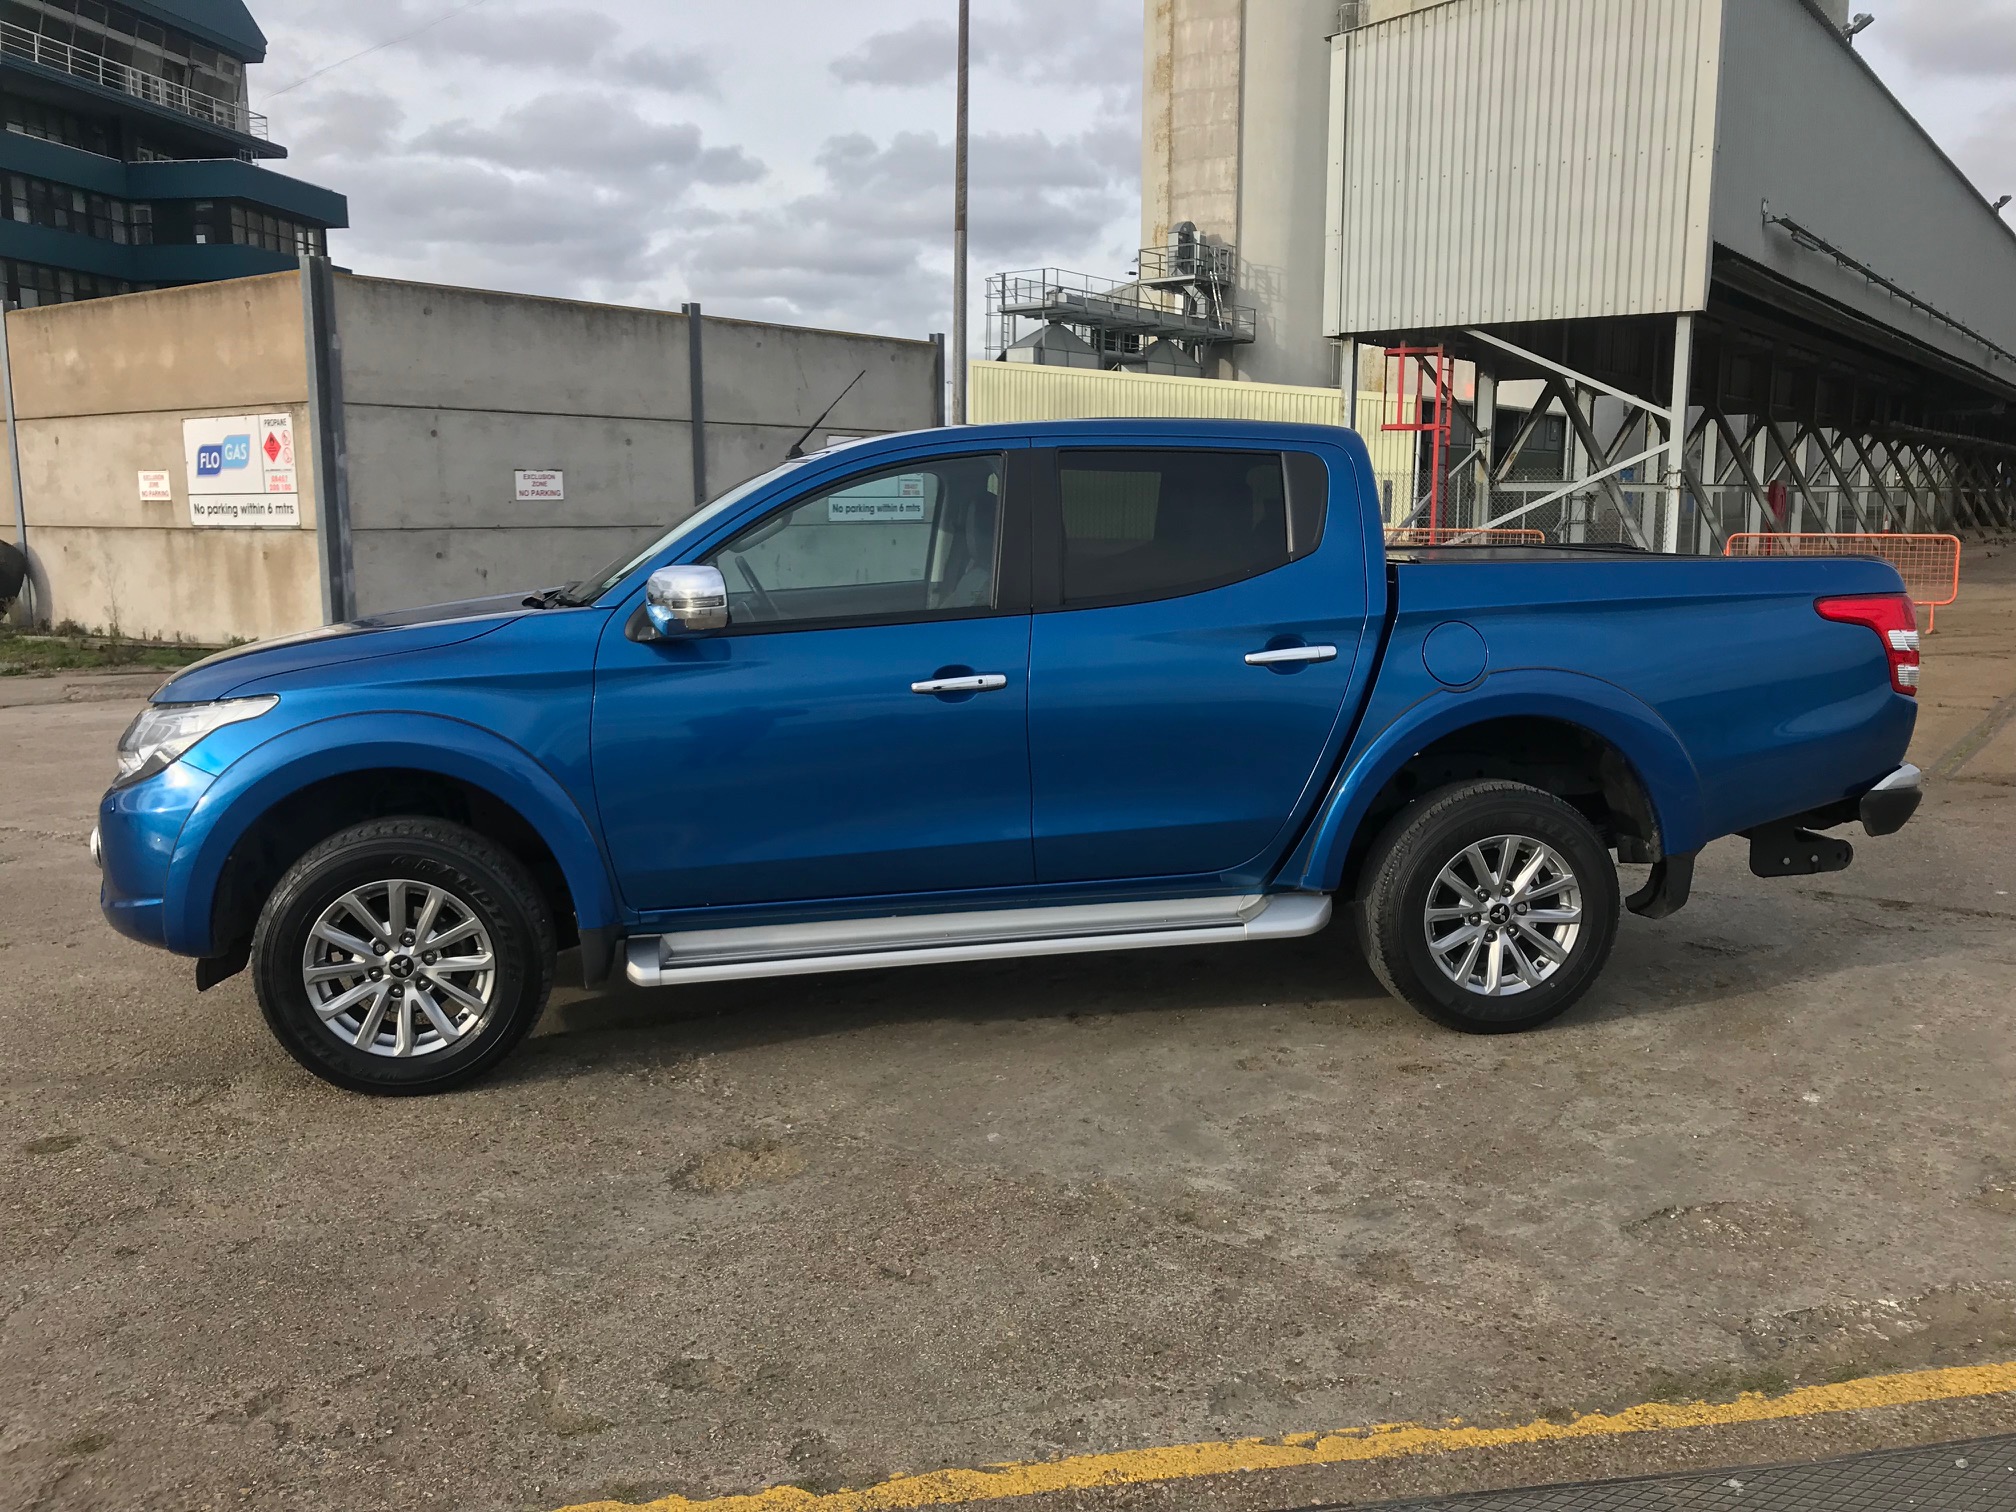 2017 Mitsubishi L200 Double Cab Pick Up Warrior Automatic 4x4 - SOLD